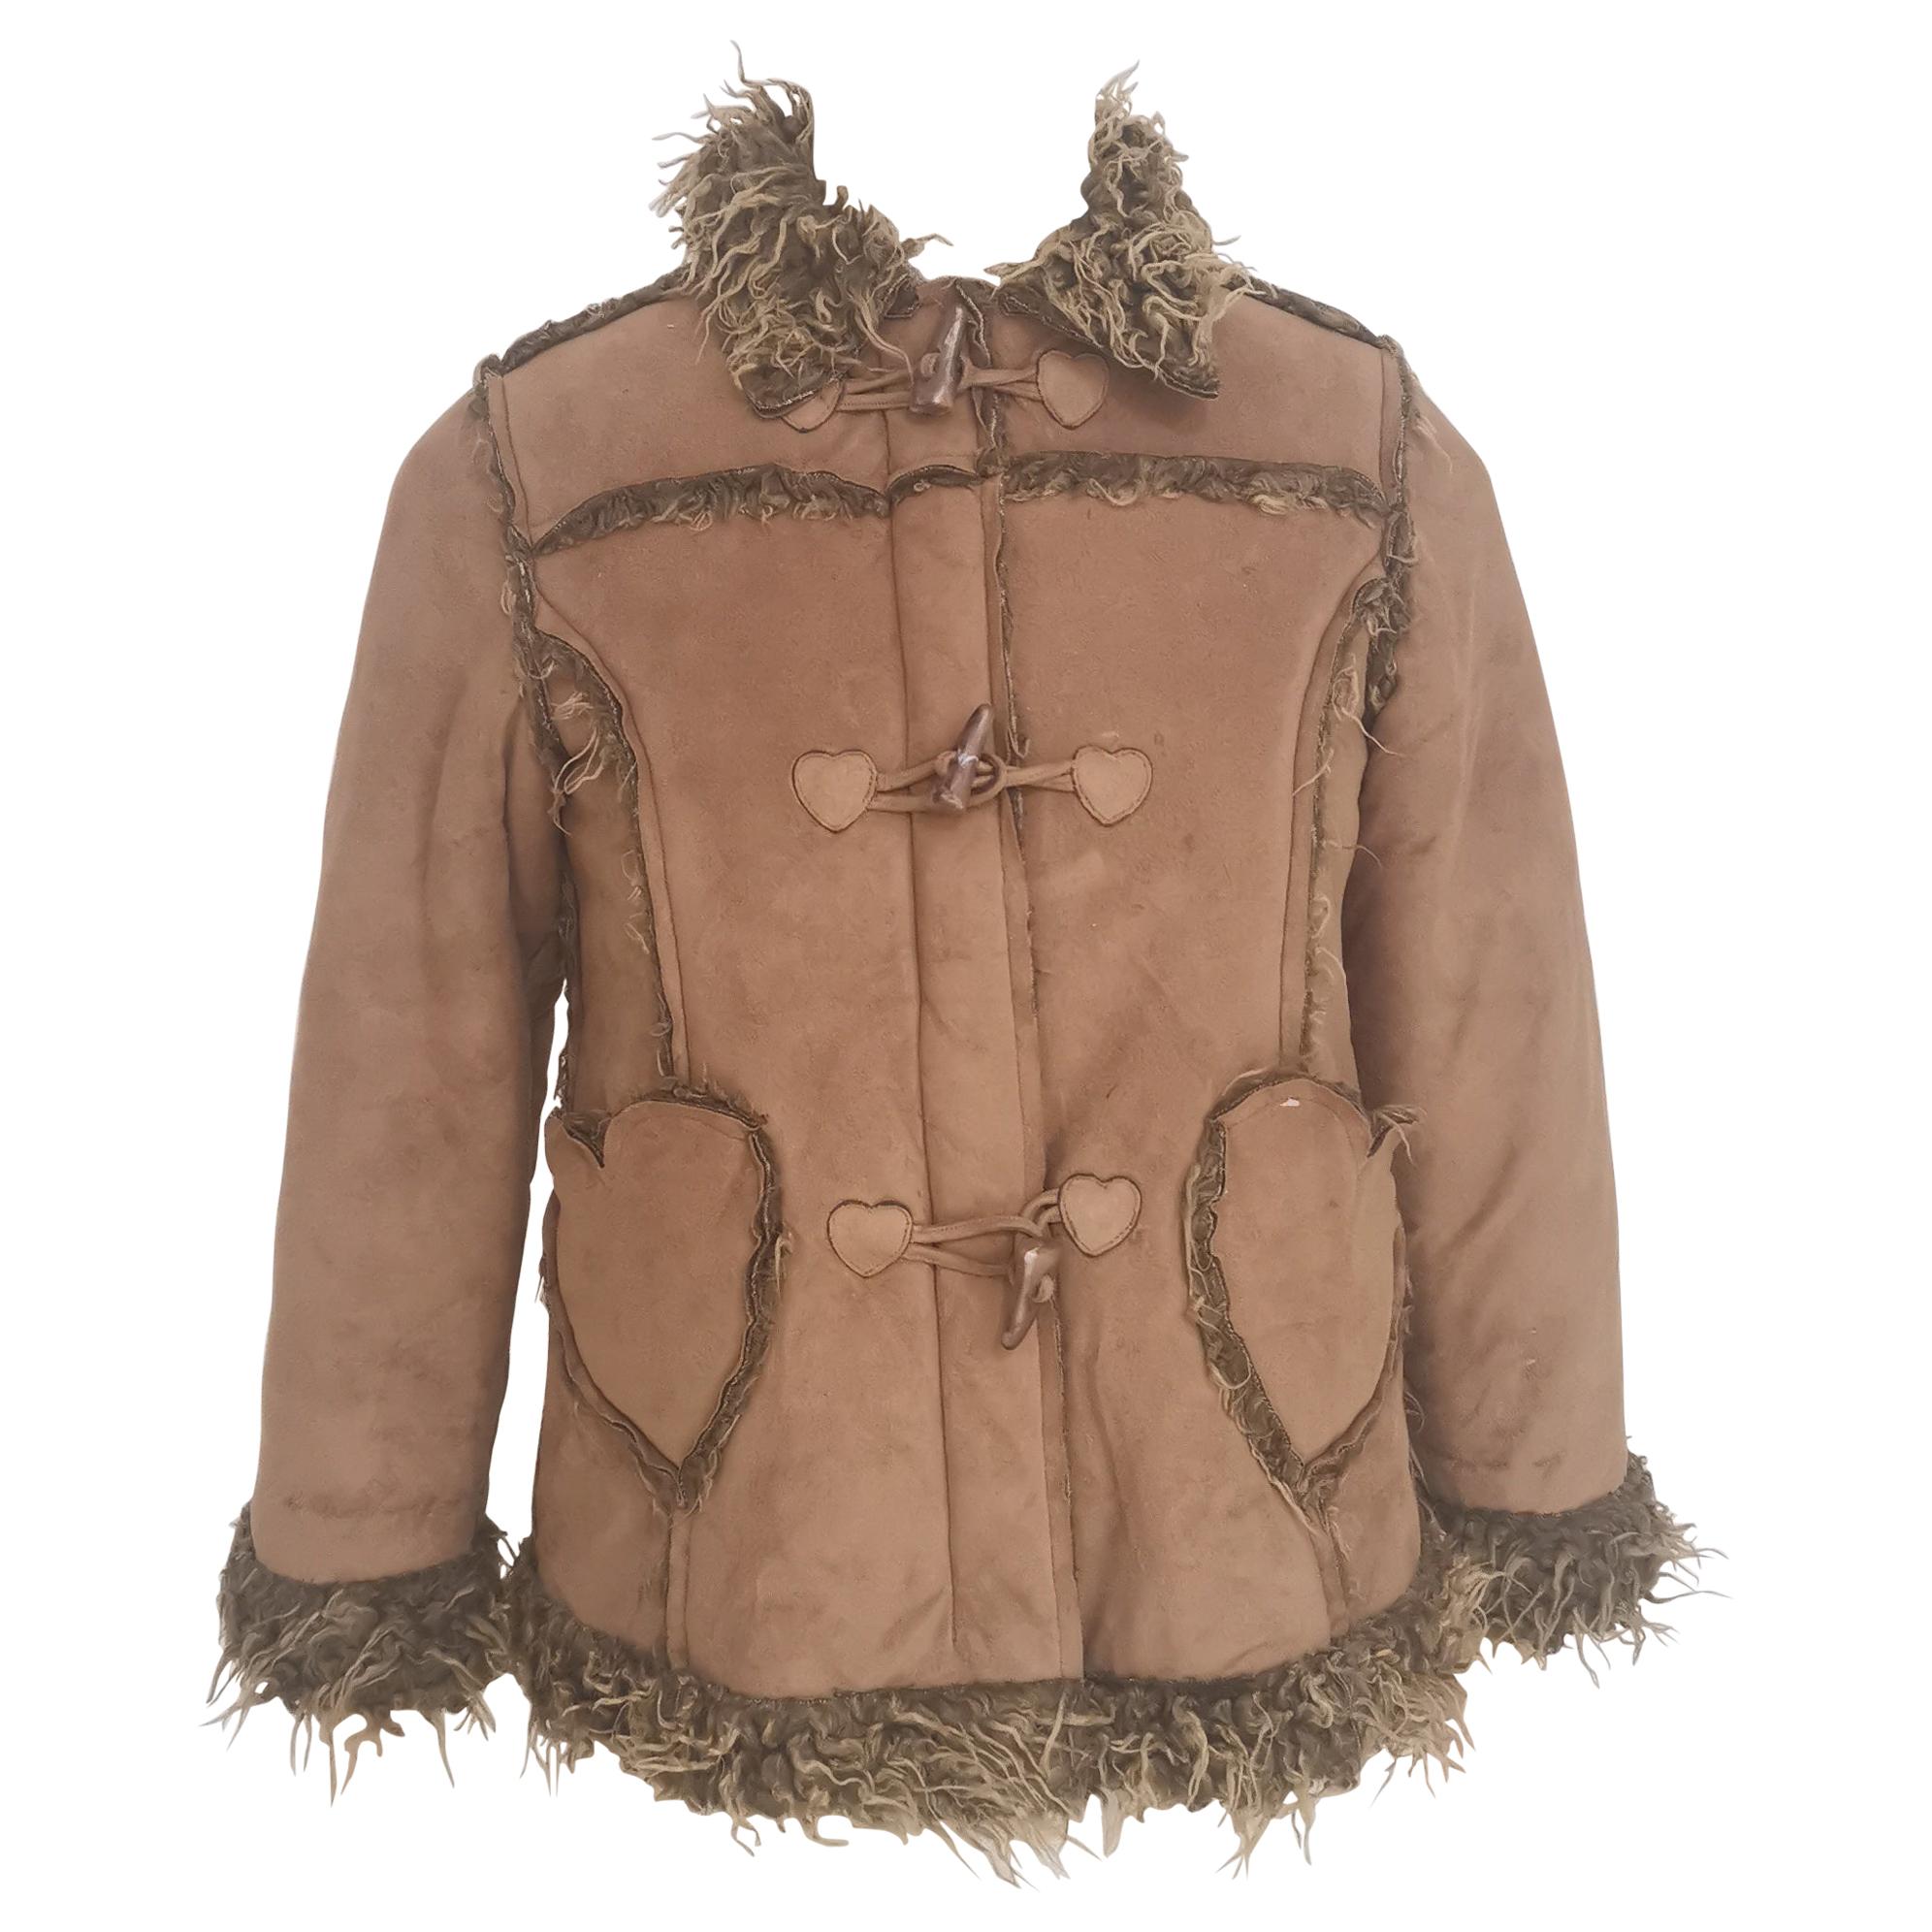 Moschino brown suede jacket